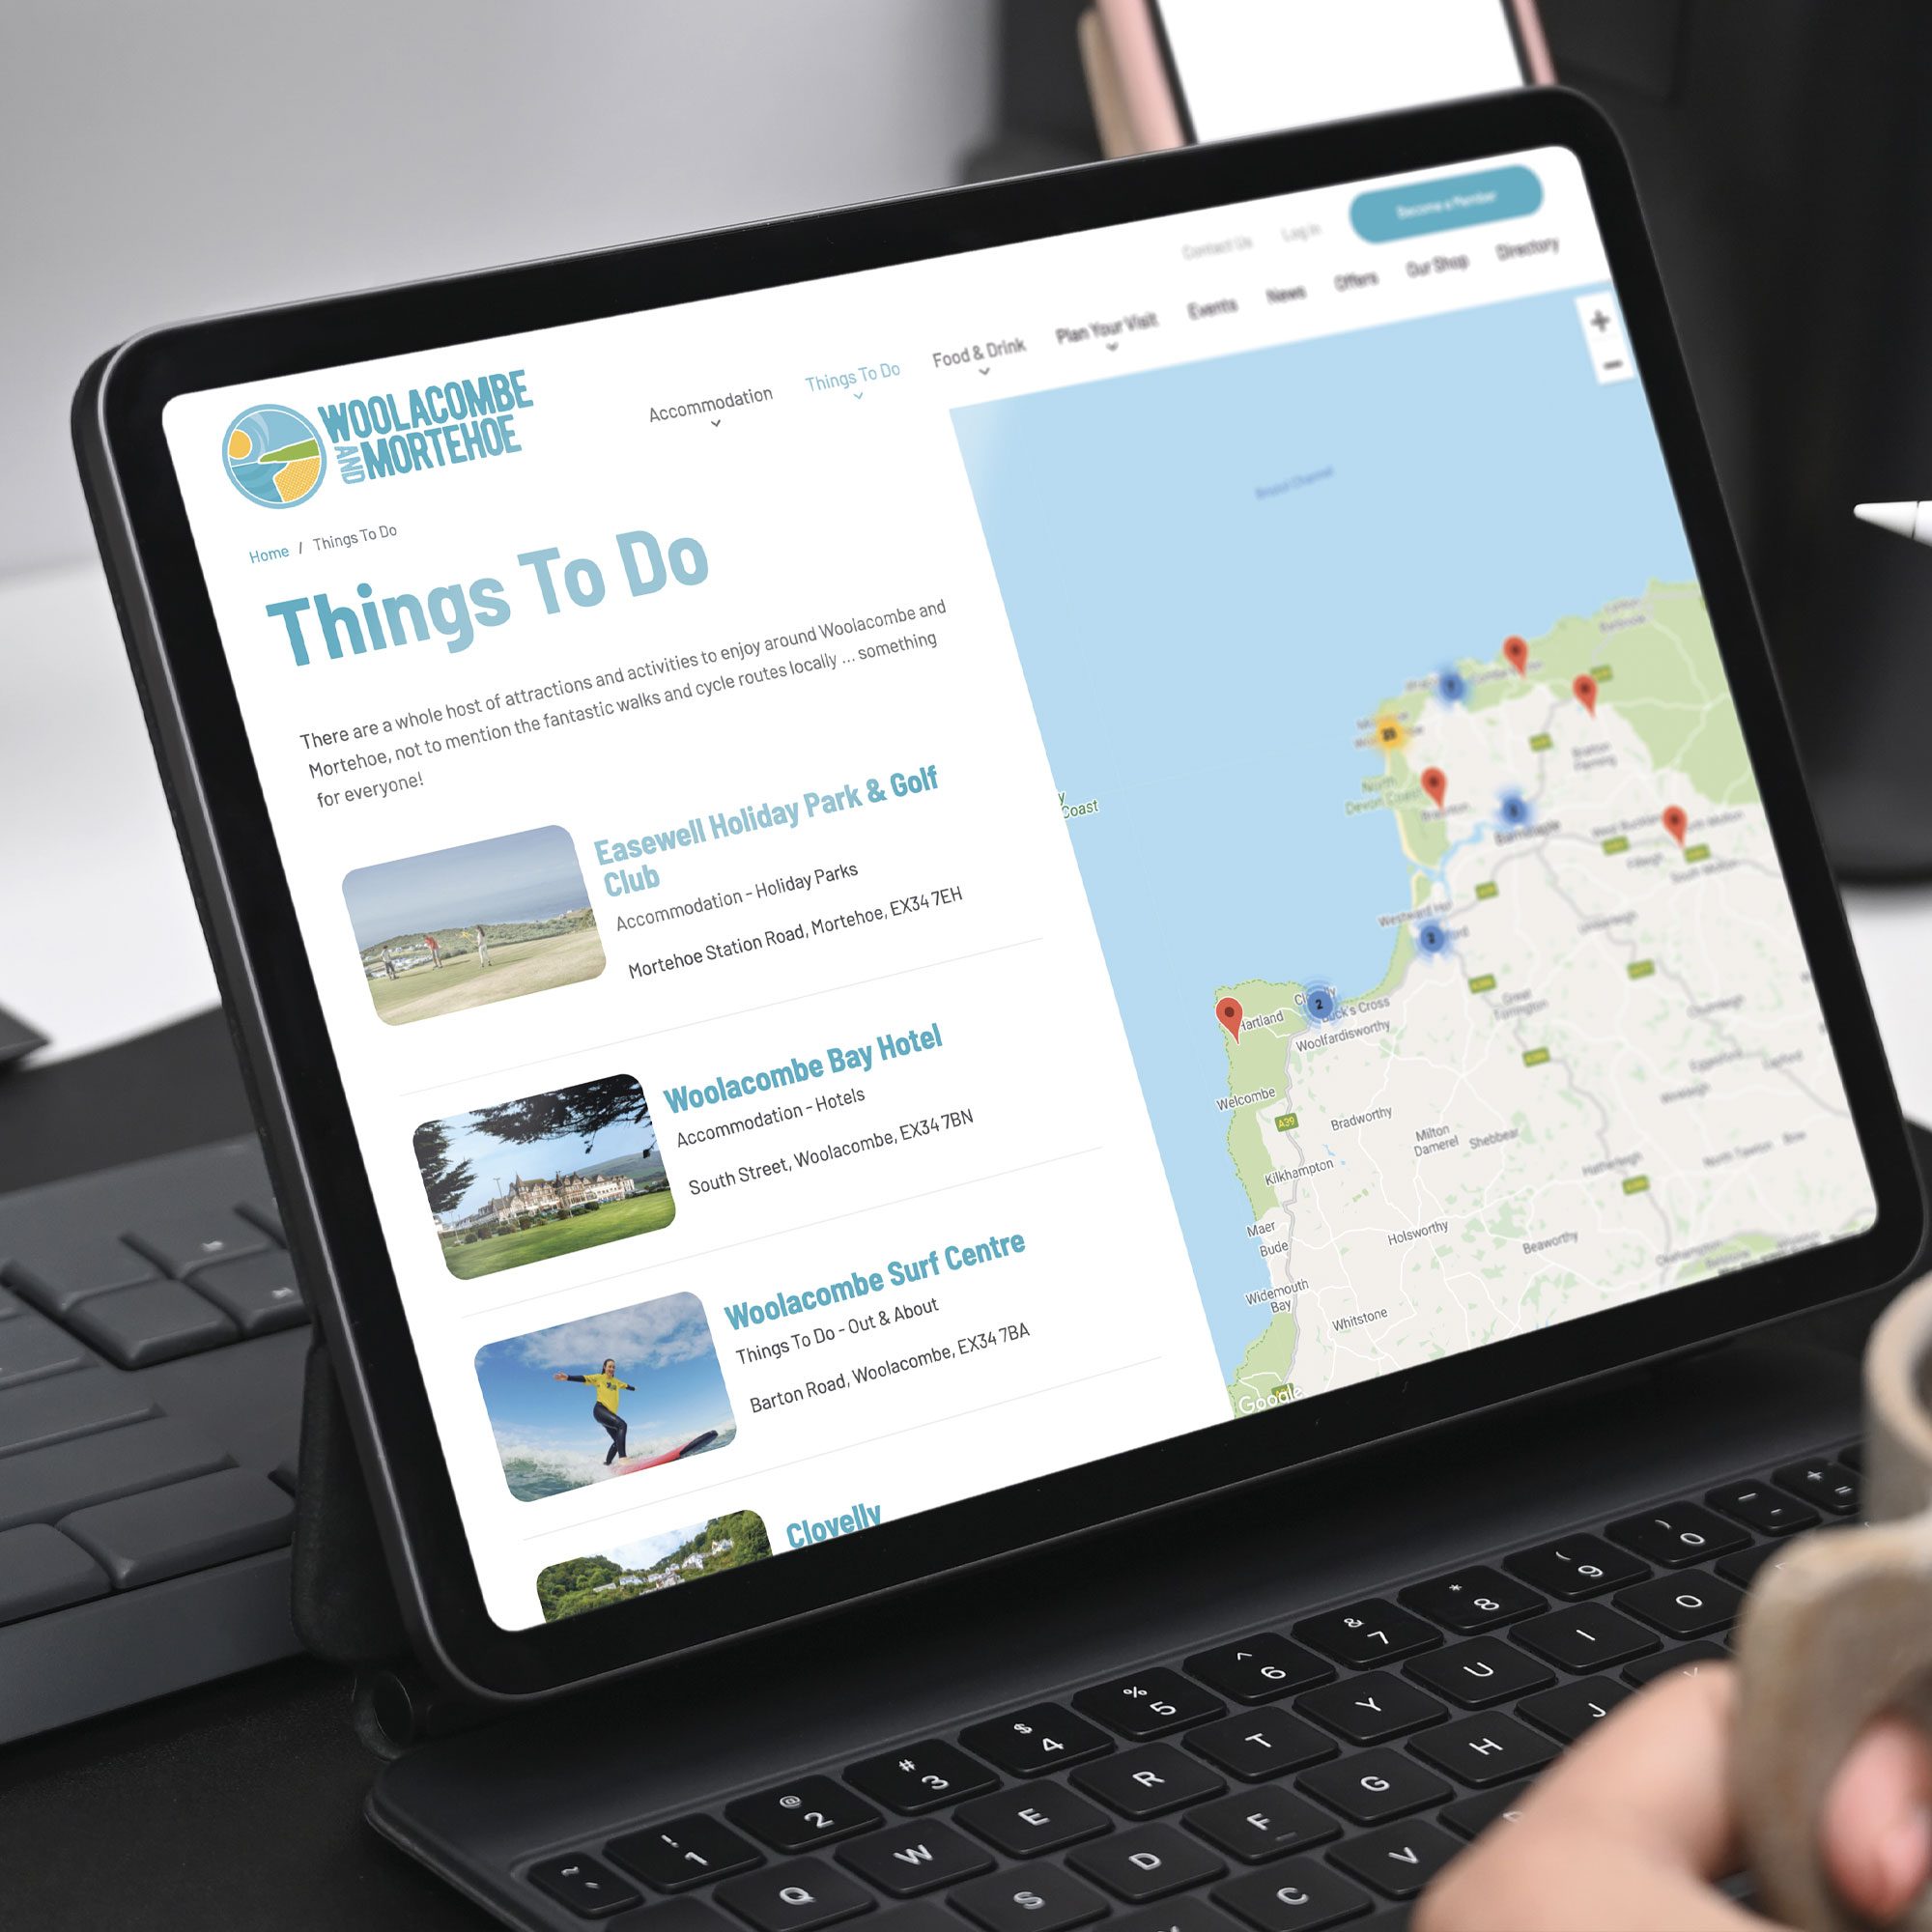 Woolacombe TIC website design and development by Inventive